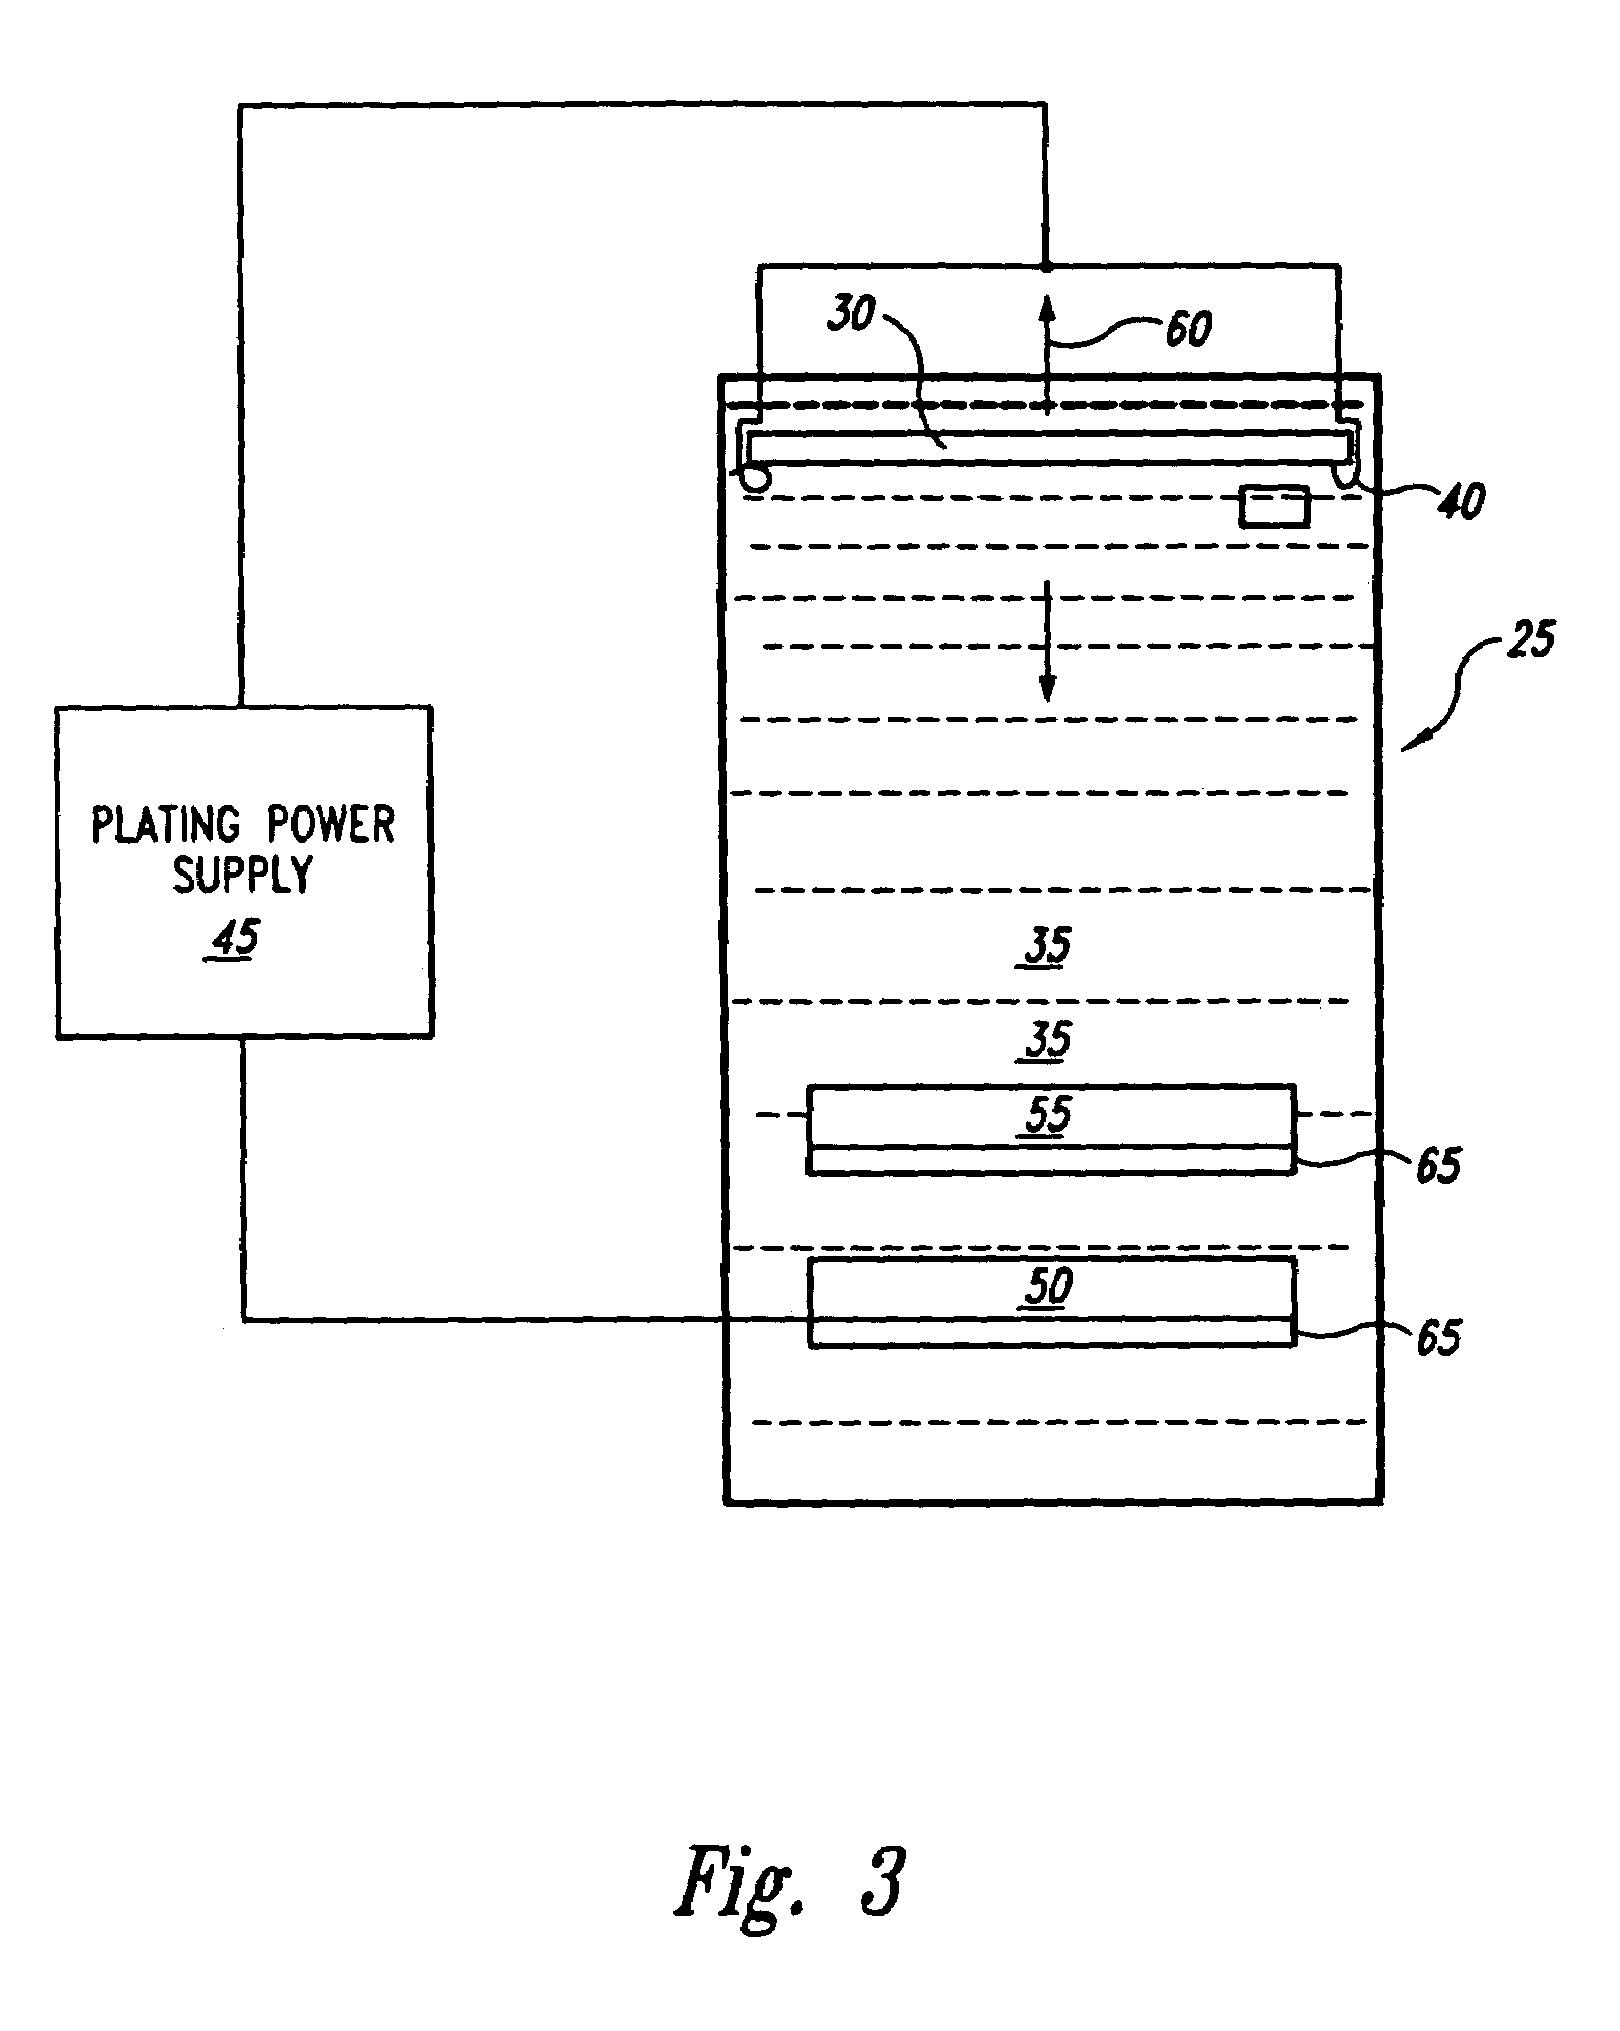 Apparatus and method for electrochemically depositing metal on a semiconductor workpiece